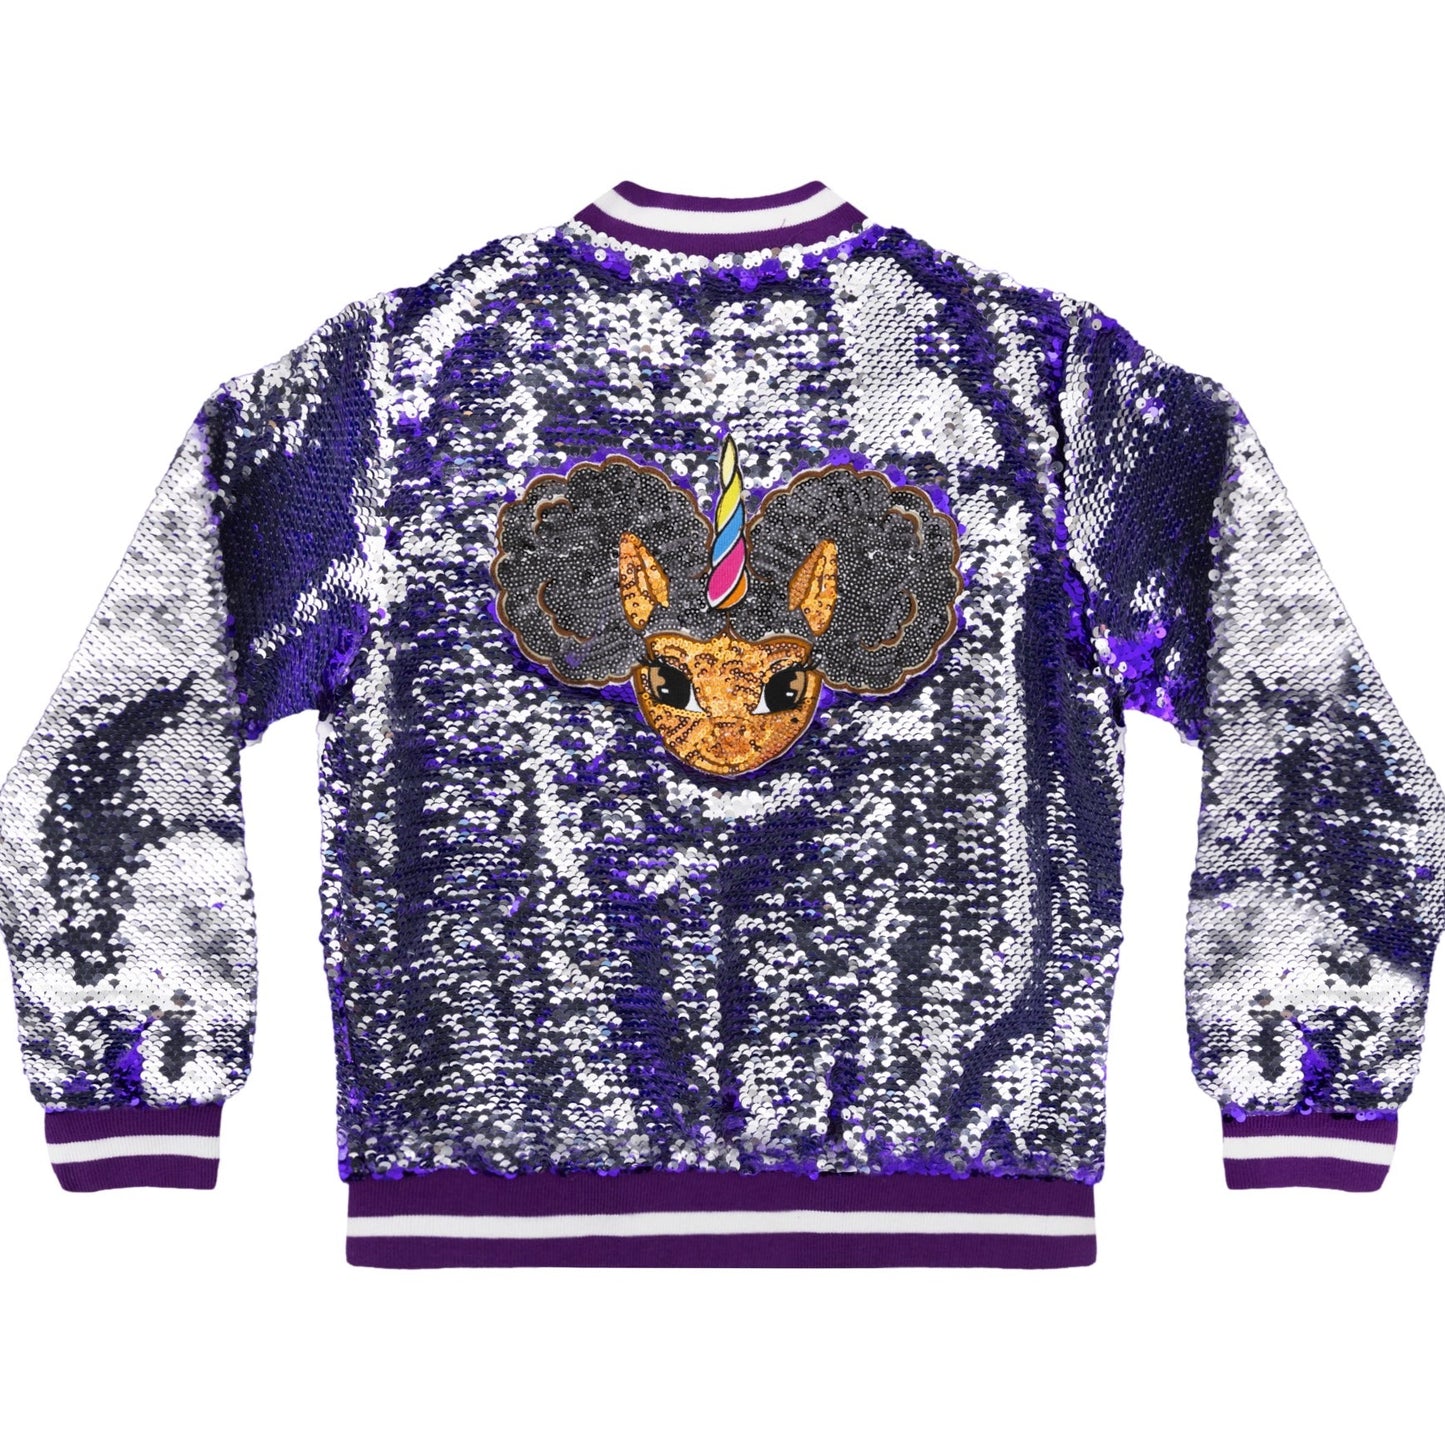 Load image into Gallery viewer, Sequin Jacket with Afro Puff Unicorn Studded Logo Patch - Pop Star Purple
